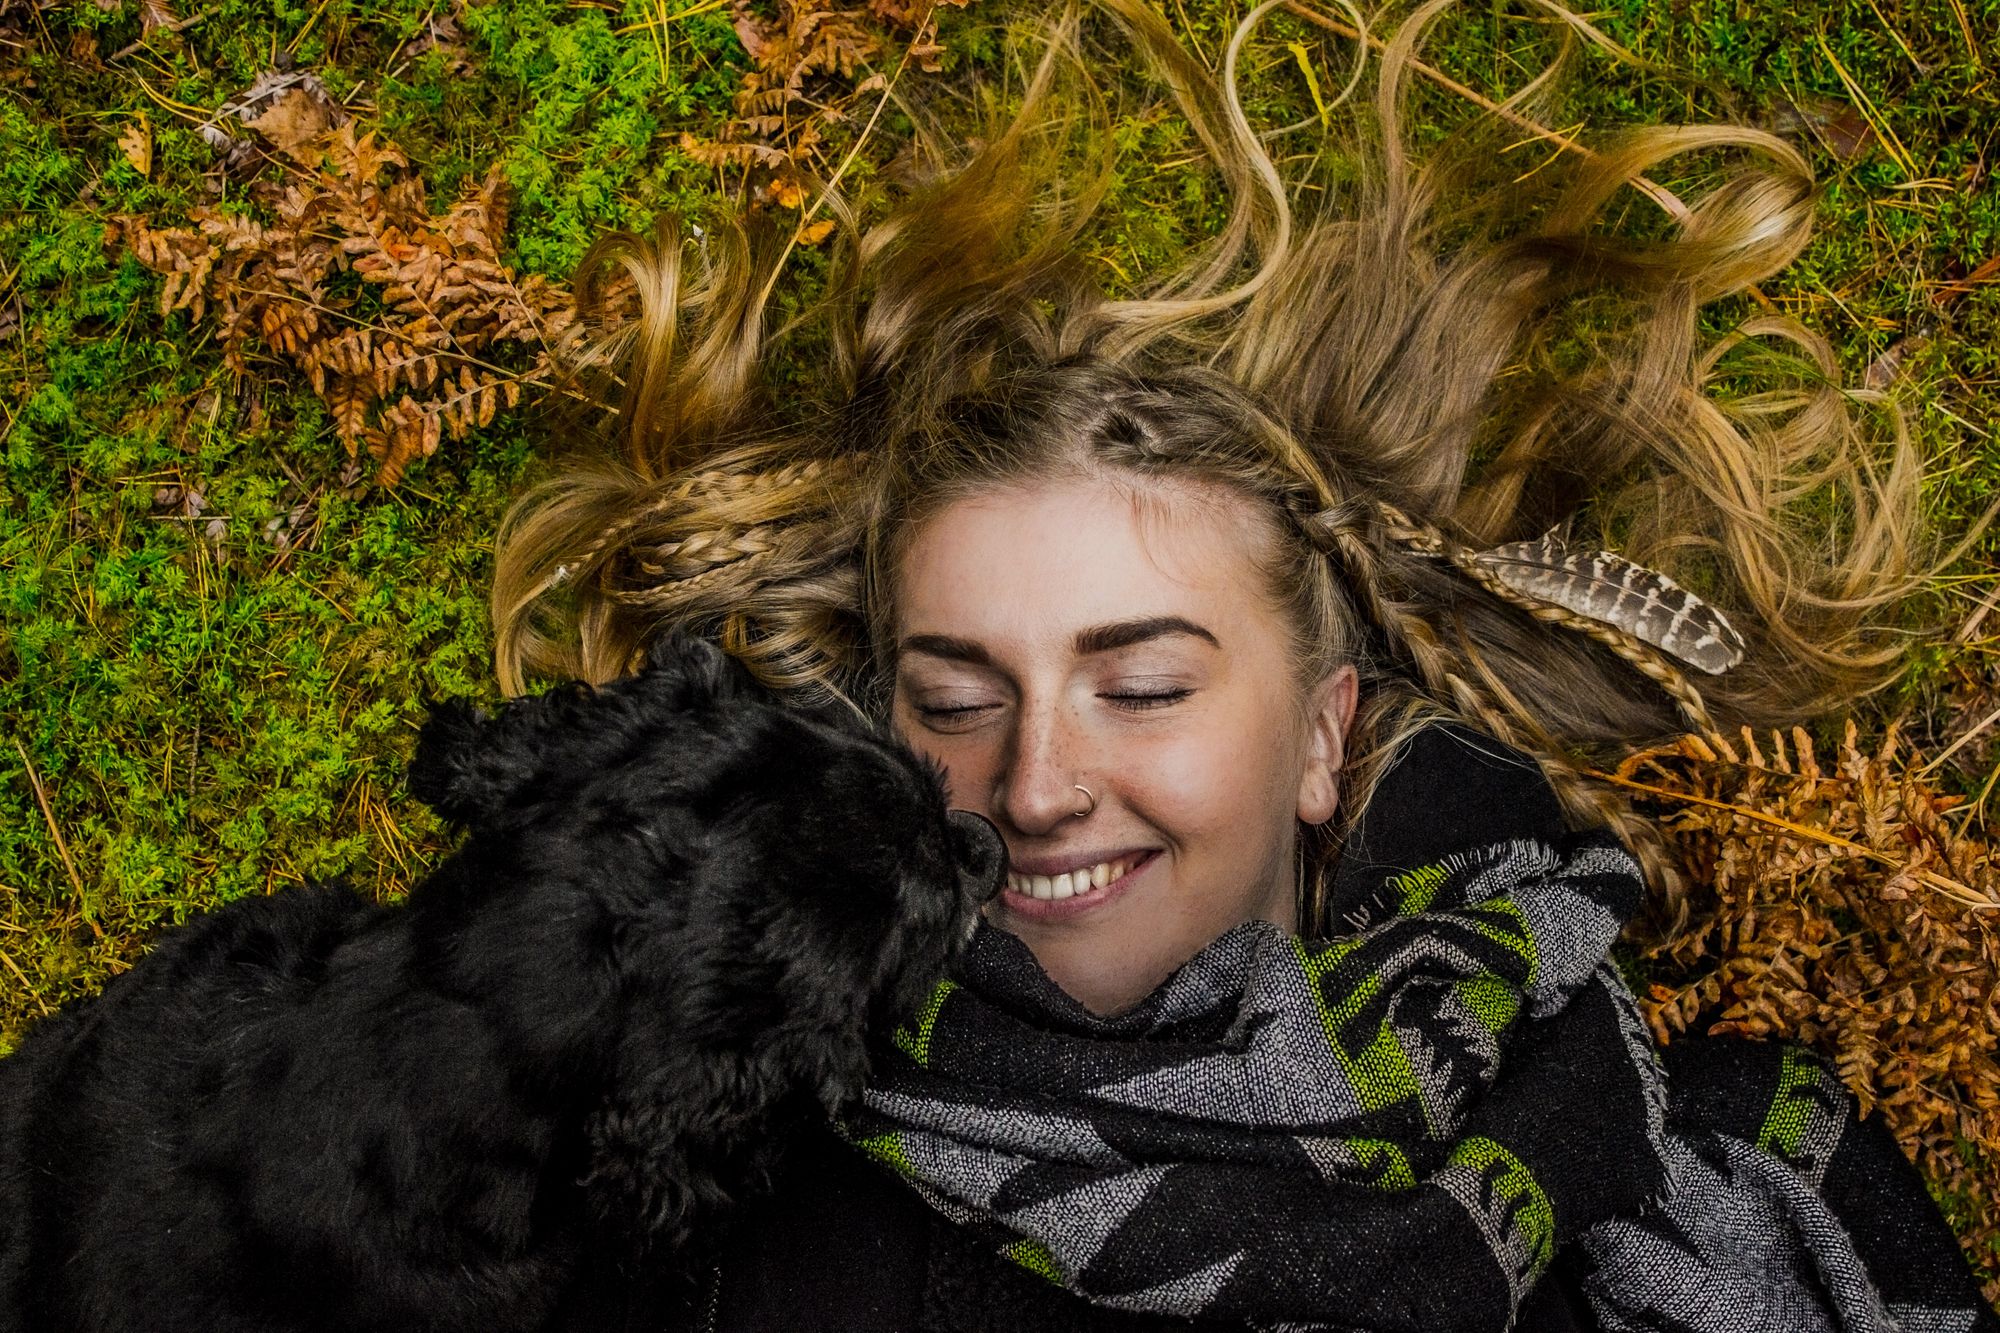 Dog kissing girl lying in the grass